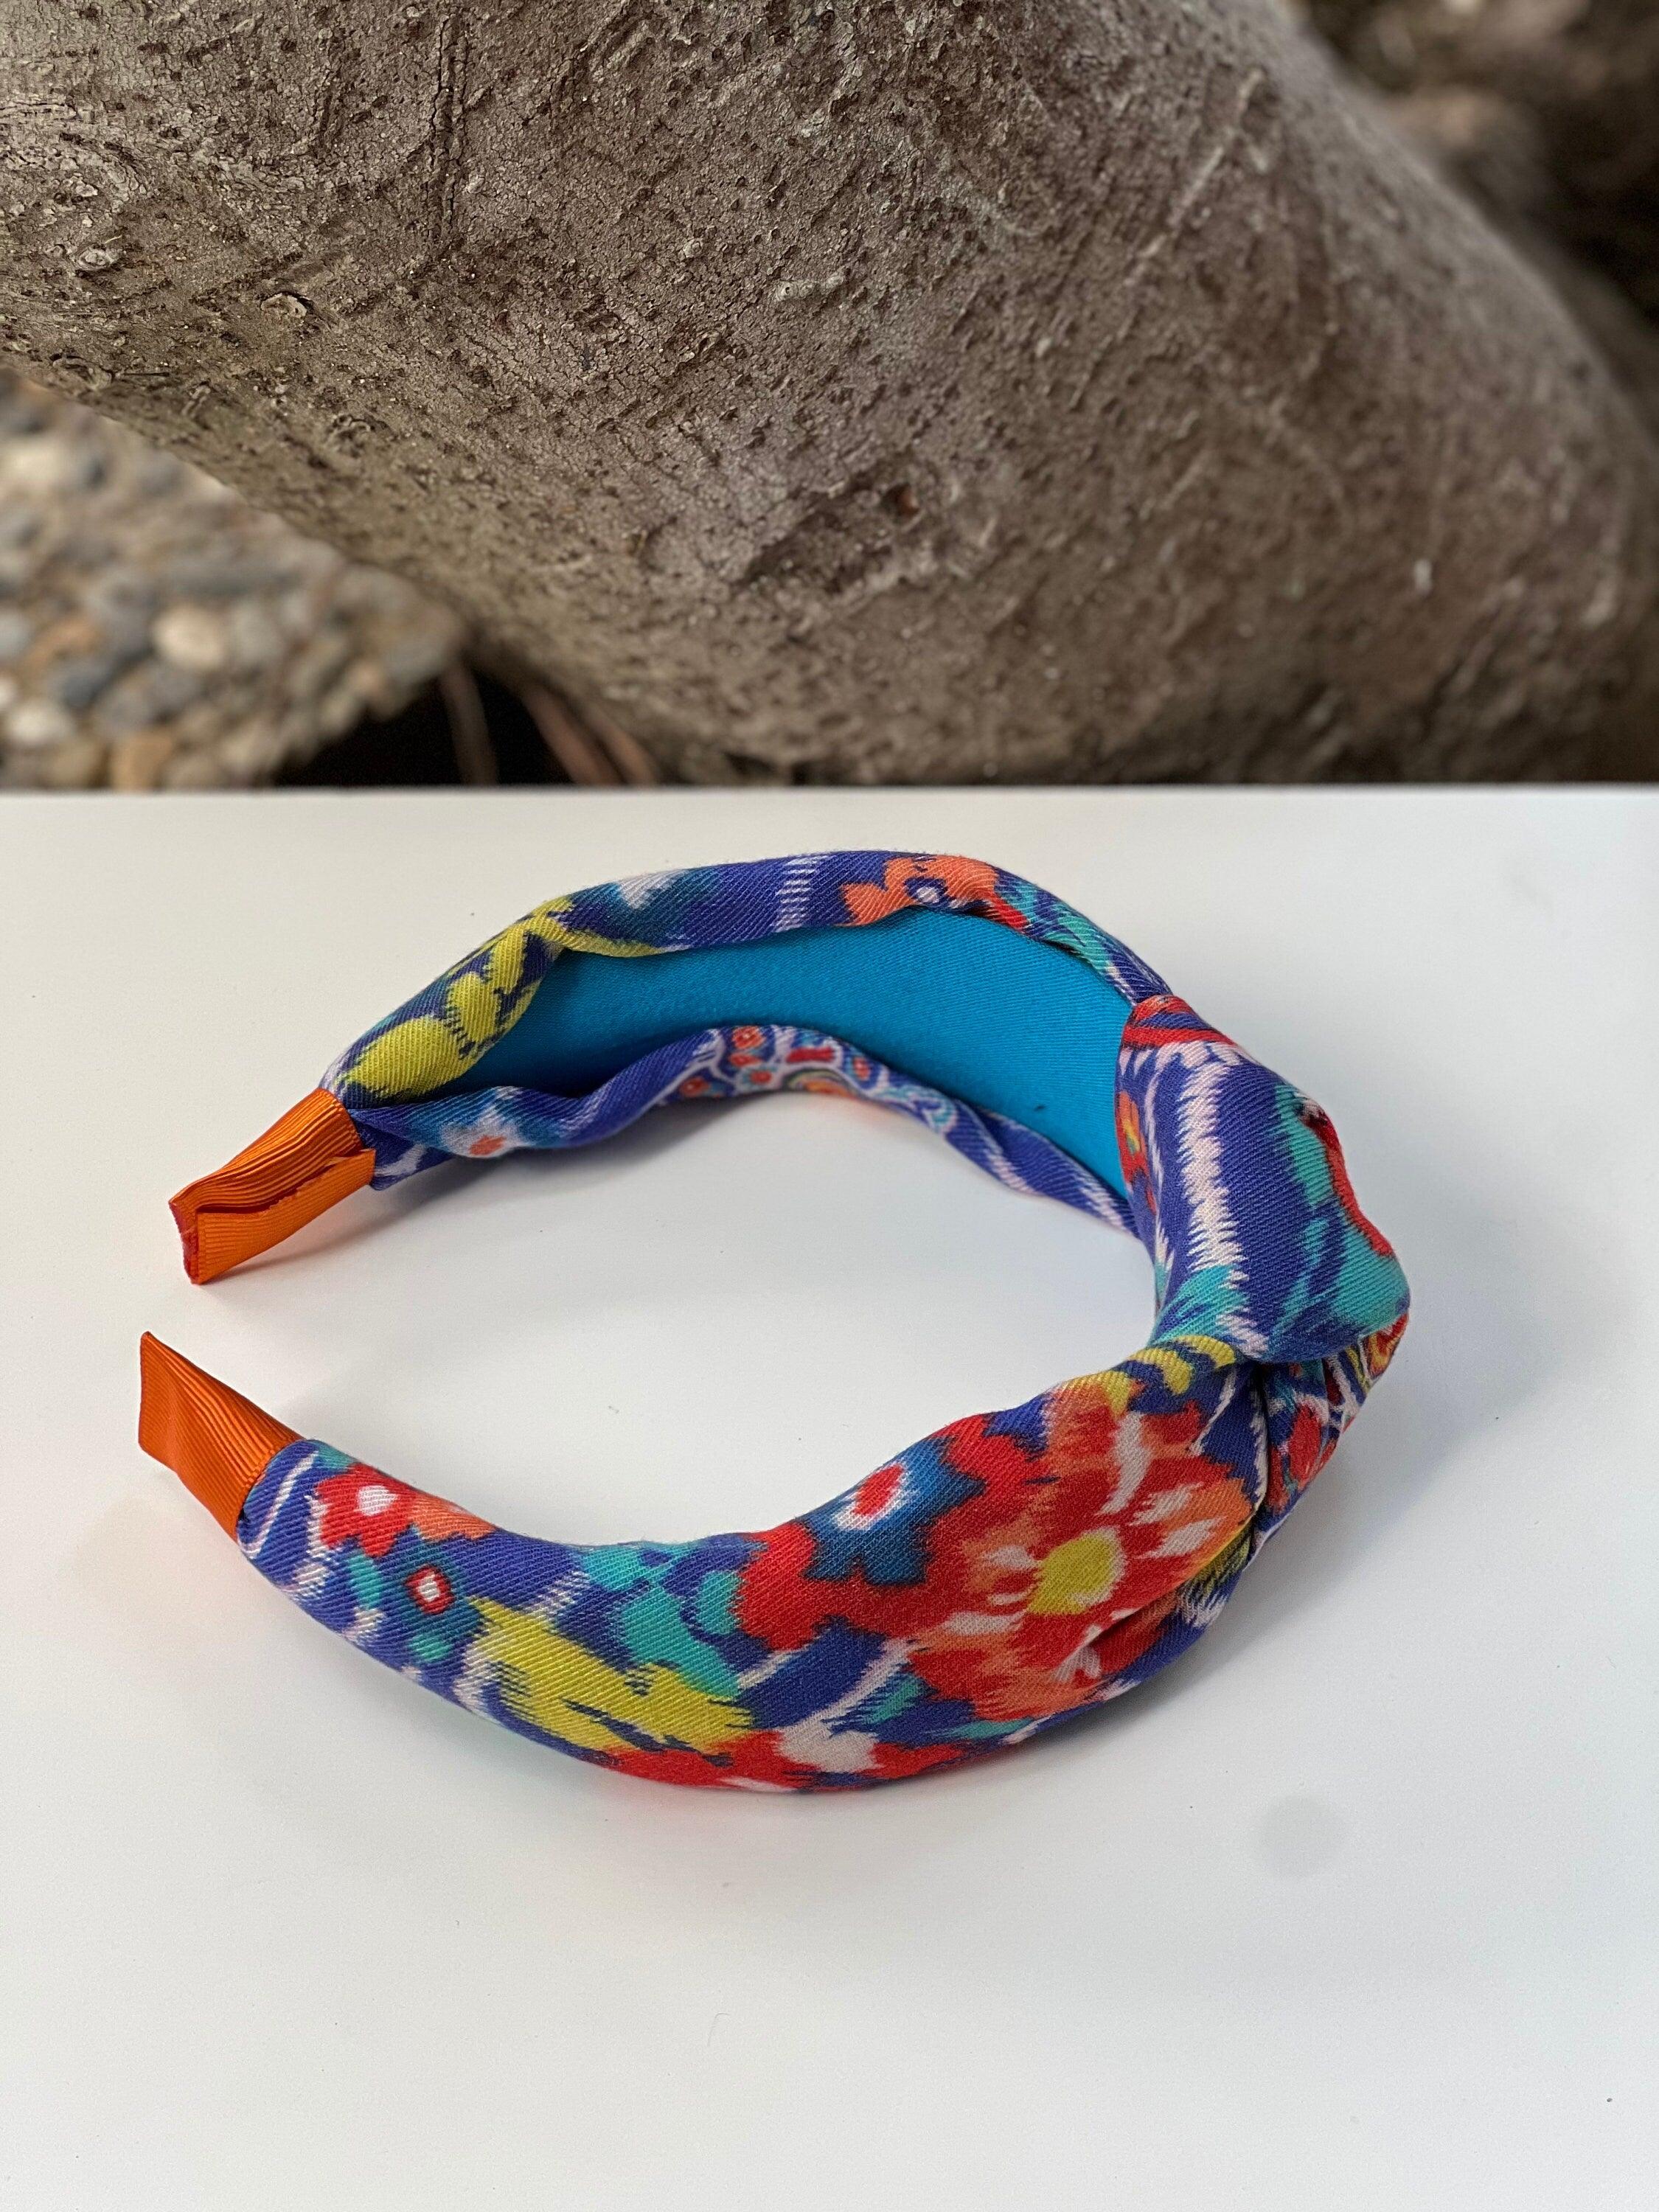 Handcrafted Ethnic Pattern Knotted Headband in Blue, Pink, and Yellow - Wide and Stylish Women's Hairband with Cotton Padding available at Moyoni Design